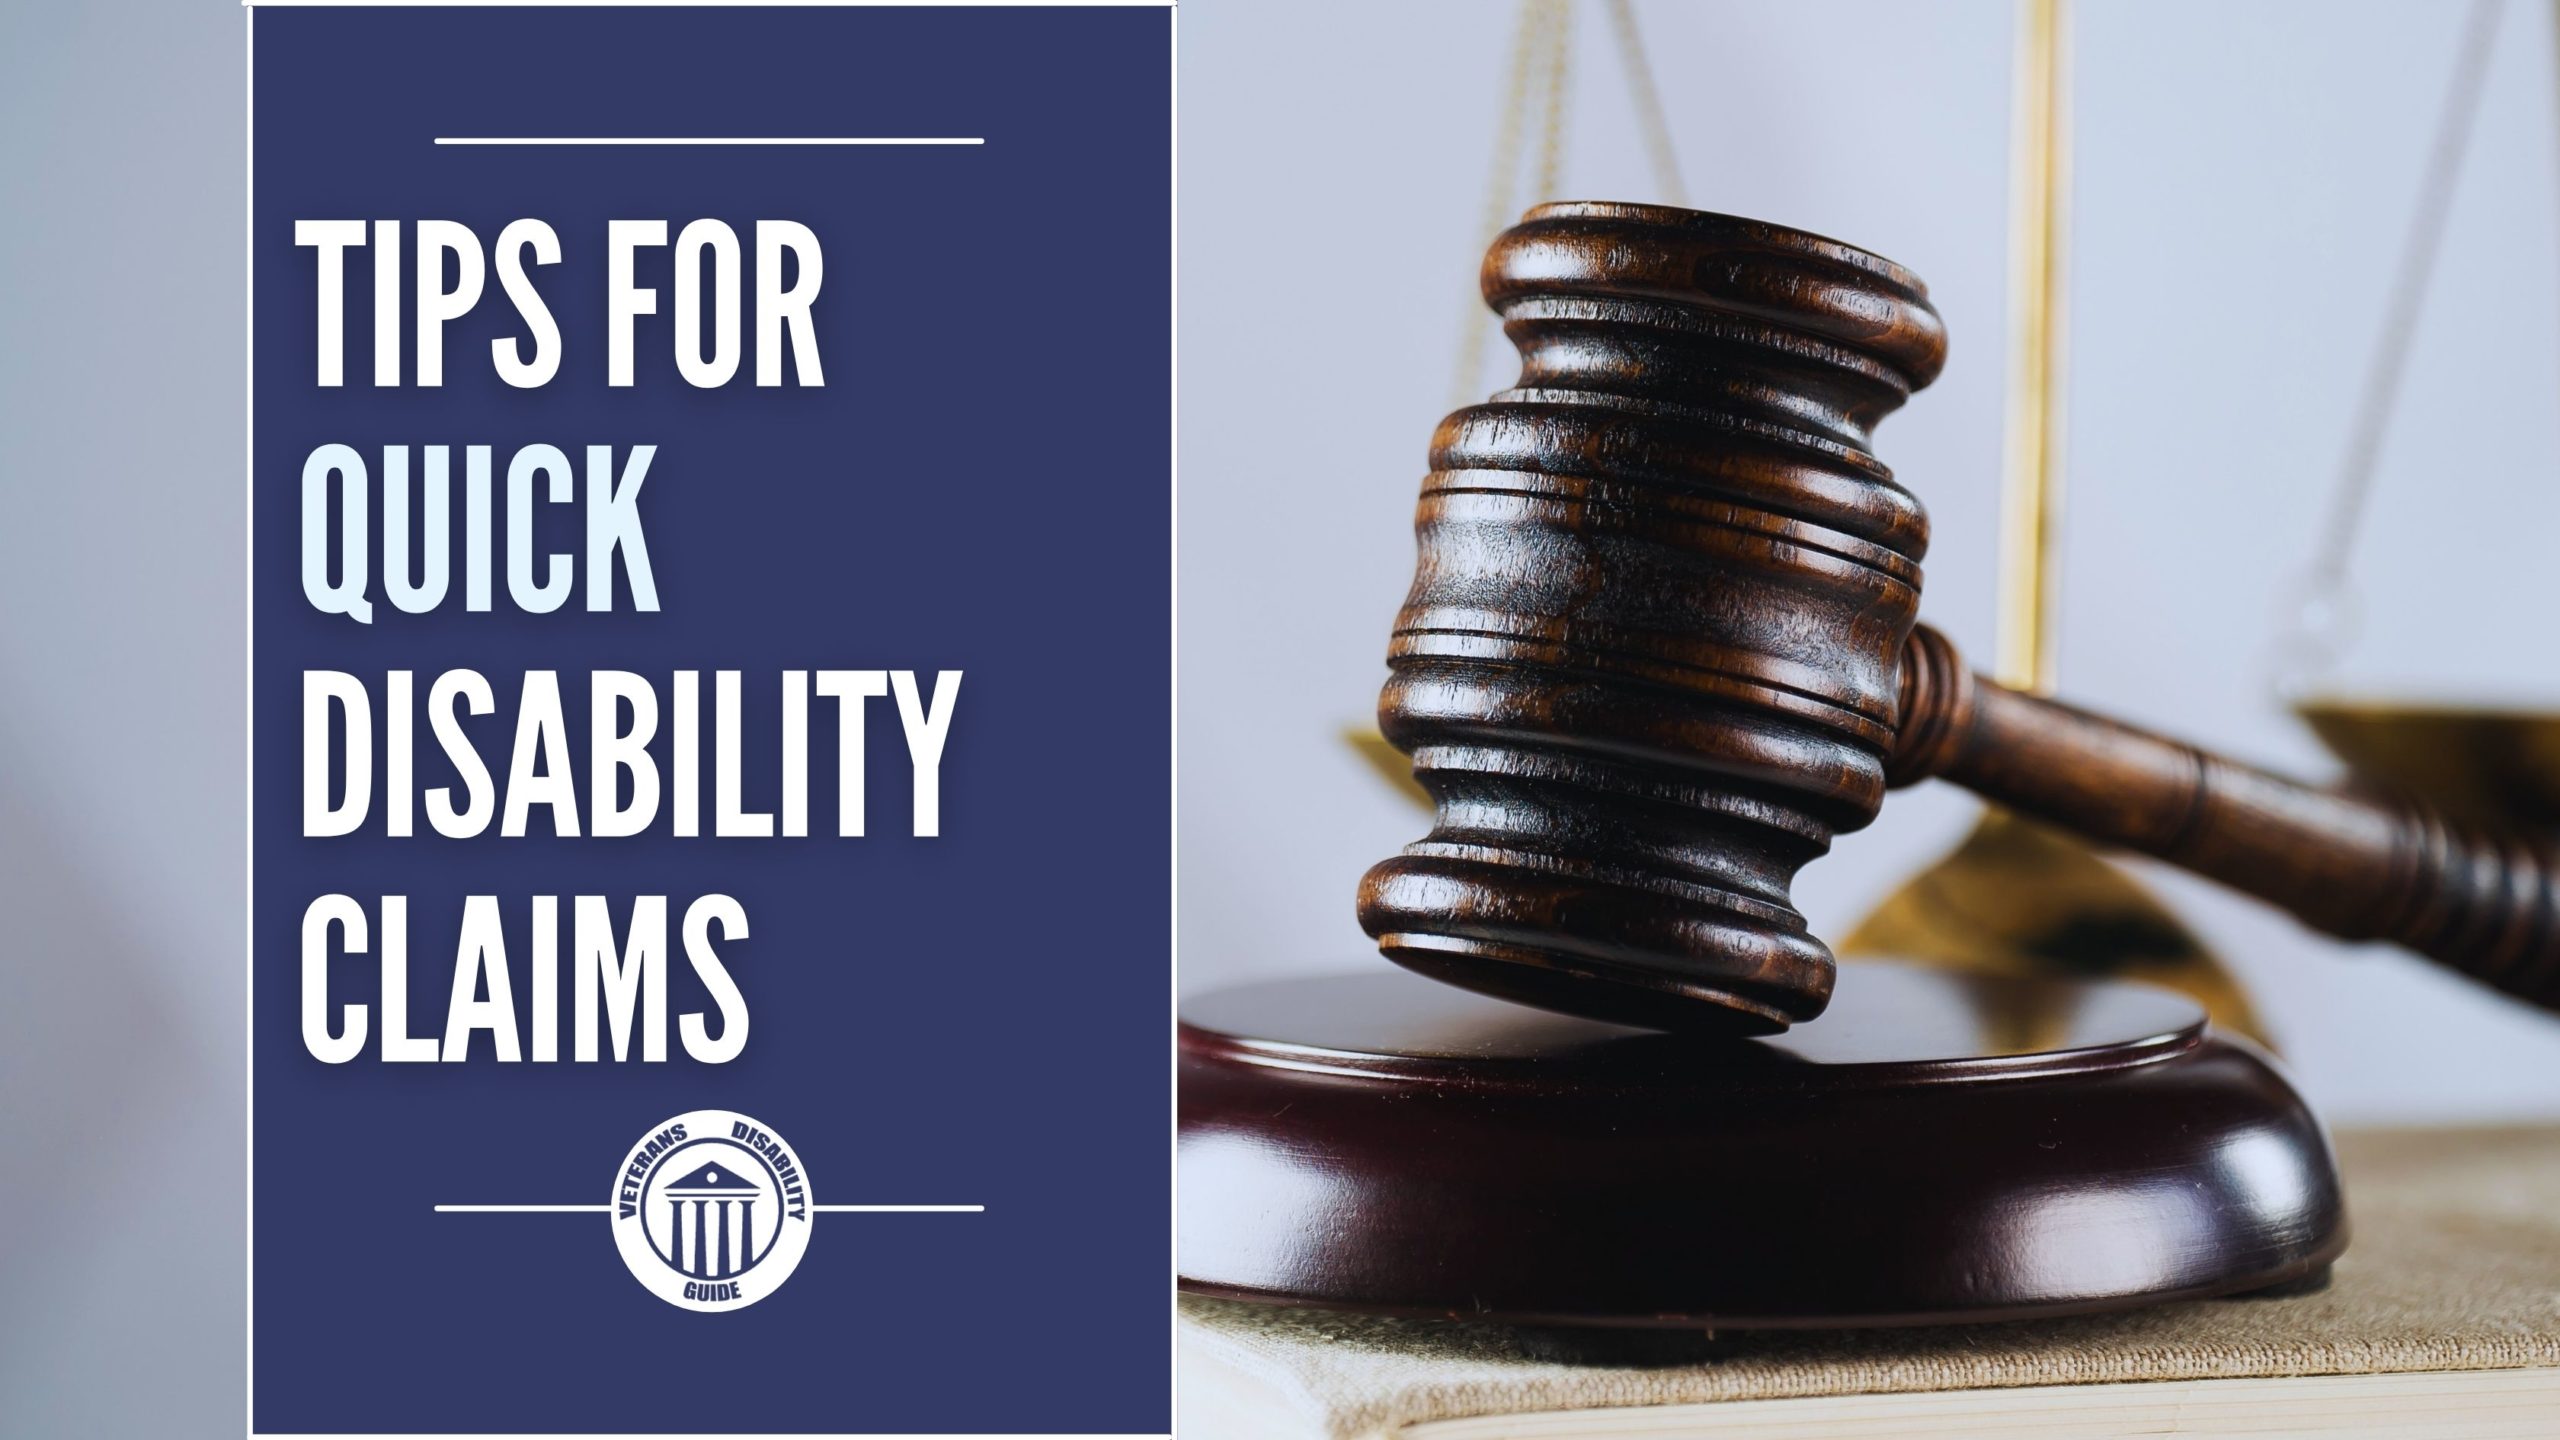 Tips For Quick Disability Claims blog header image